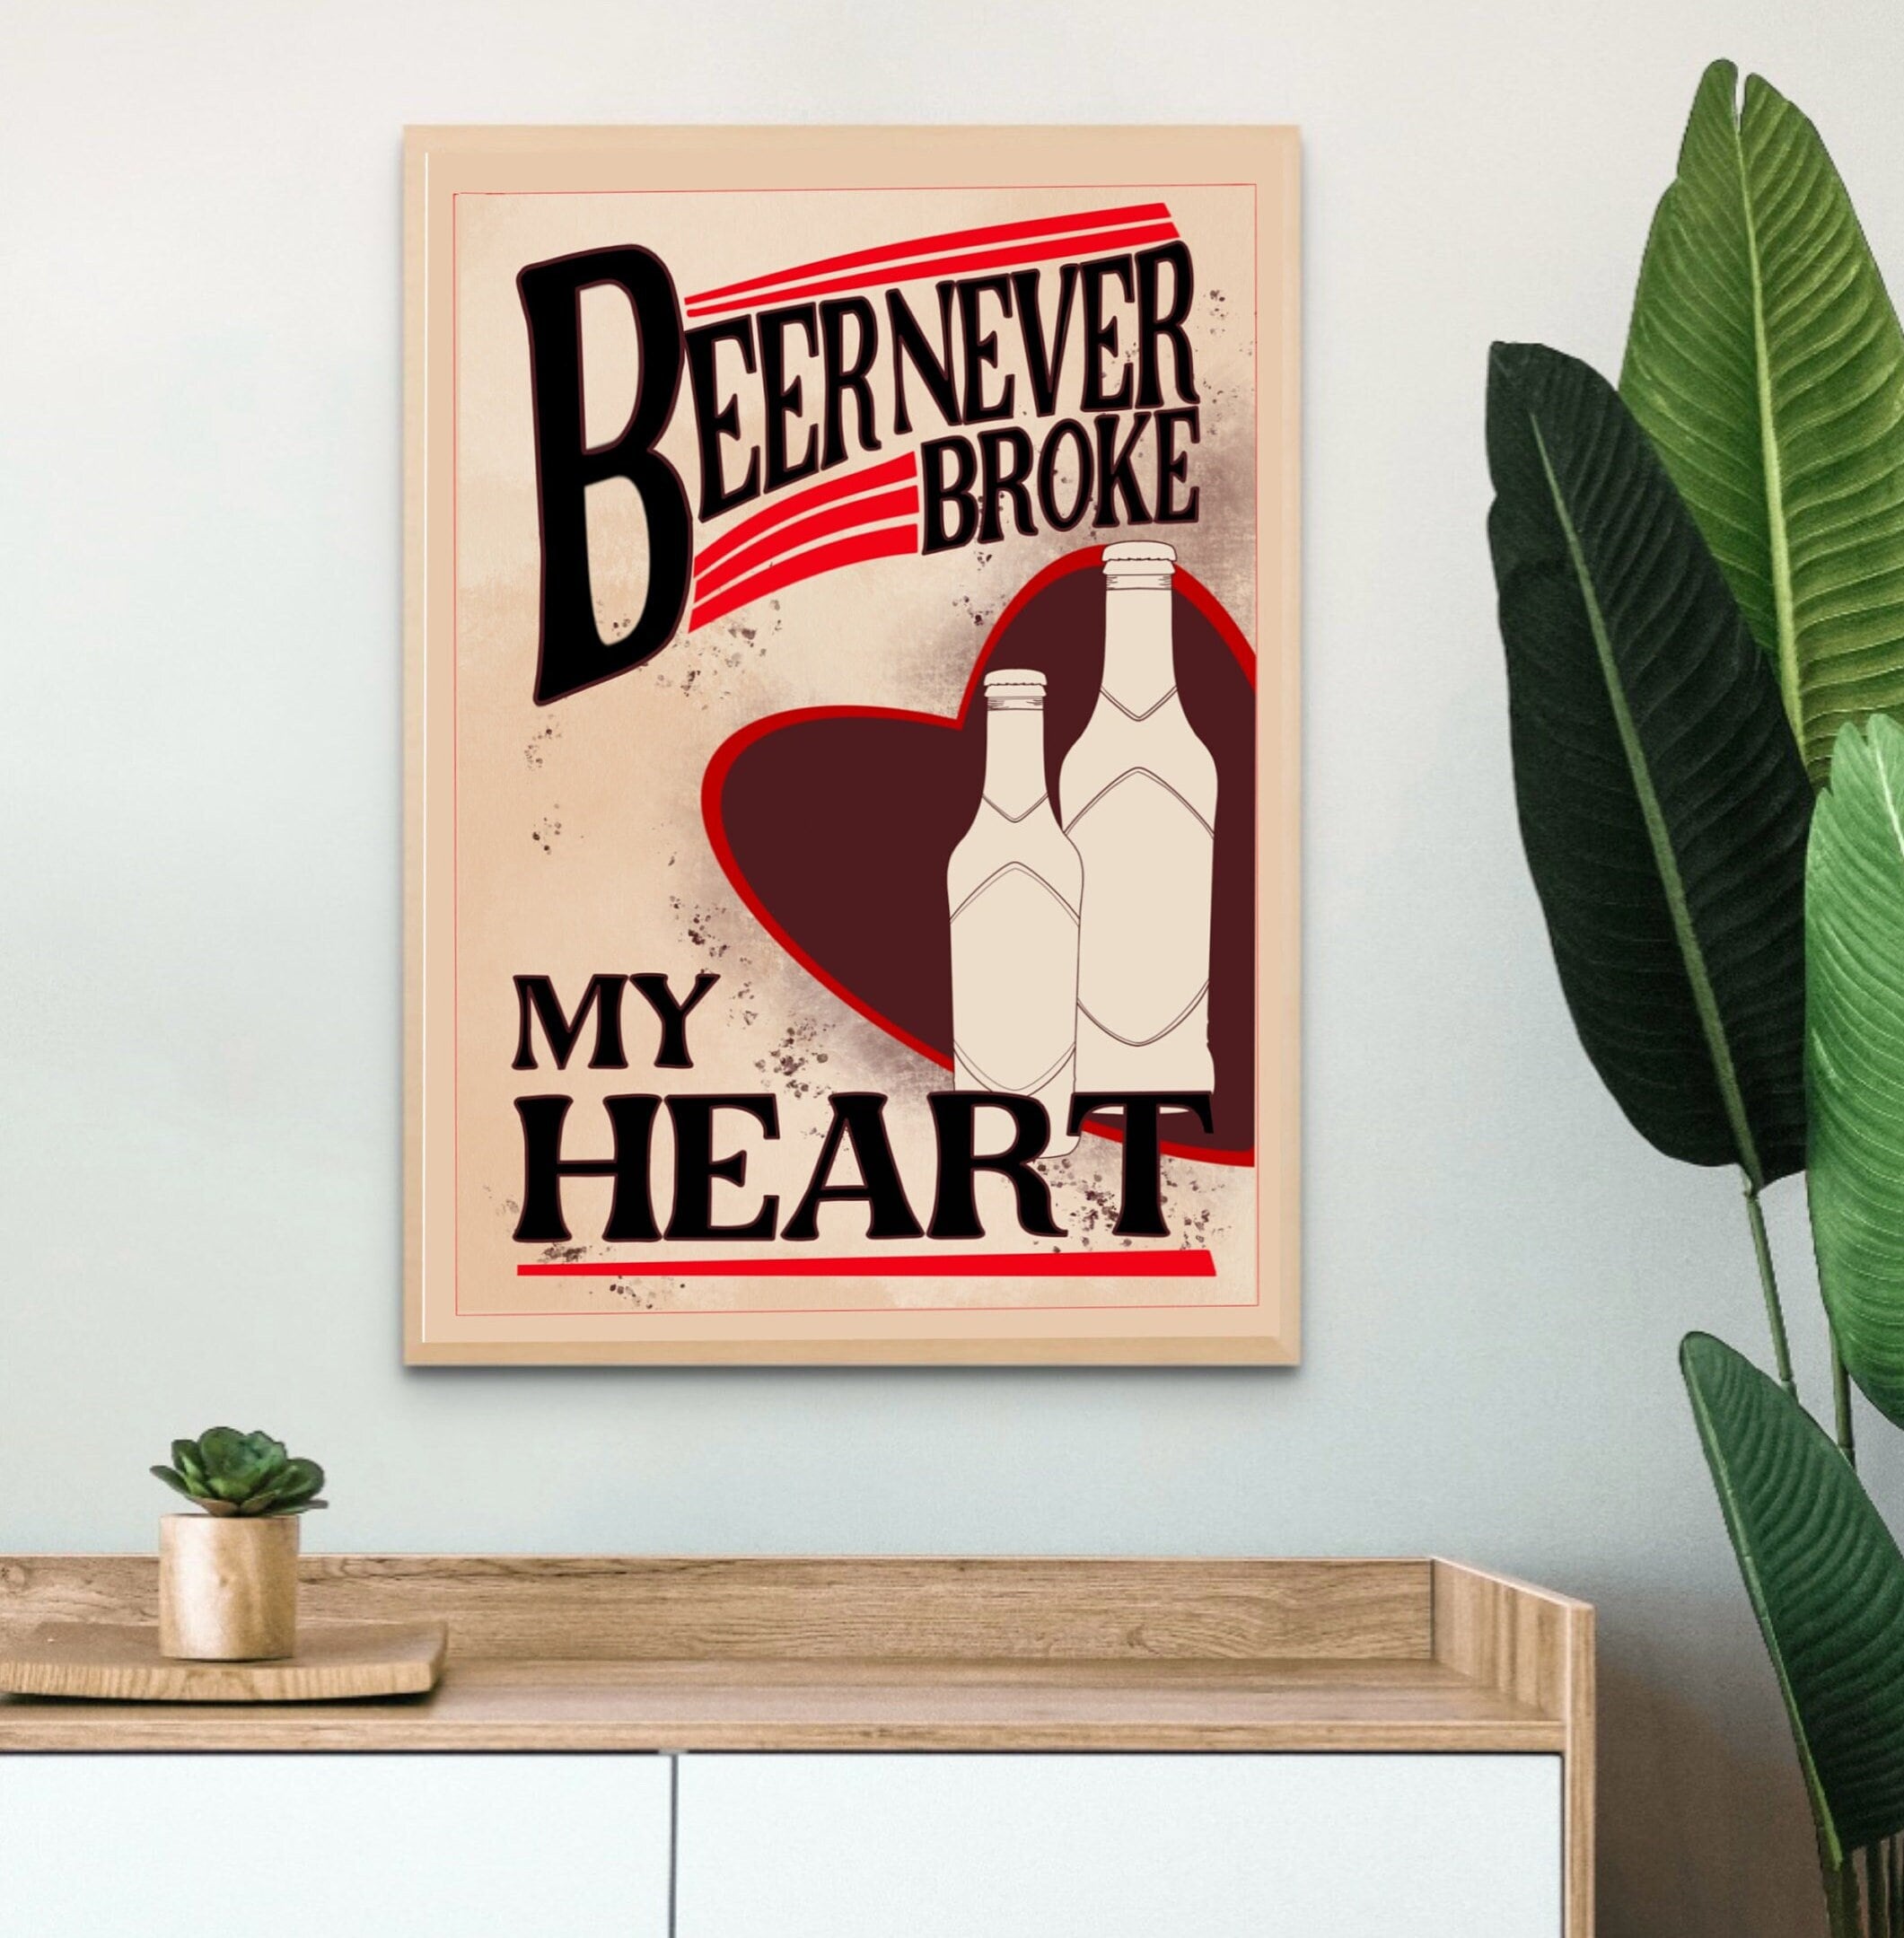 Minitowz Beautiful Crazy Heart Shaped,Beautiful Crazy Poster, Without  Frame,Luke Combs Inspired Lyric,Wall Decor, Song Lyrics Poster, Wall Art,  Song Lyrics: Buy Online at Best Price in UAE 